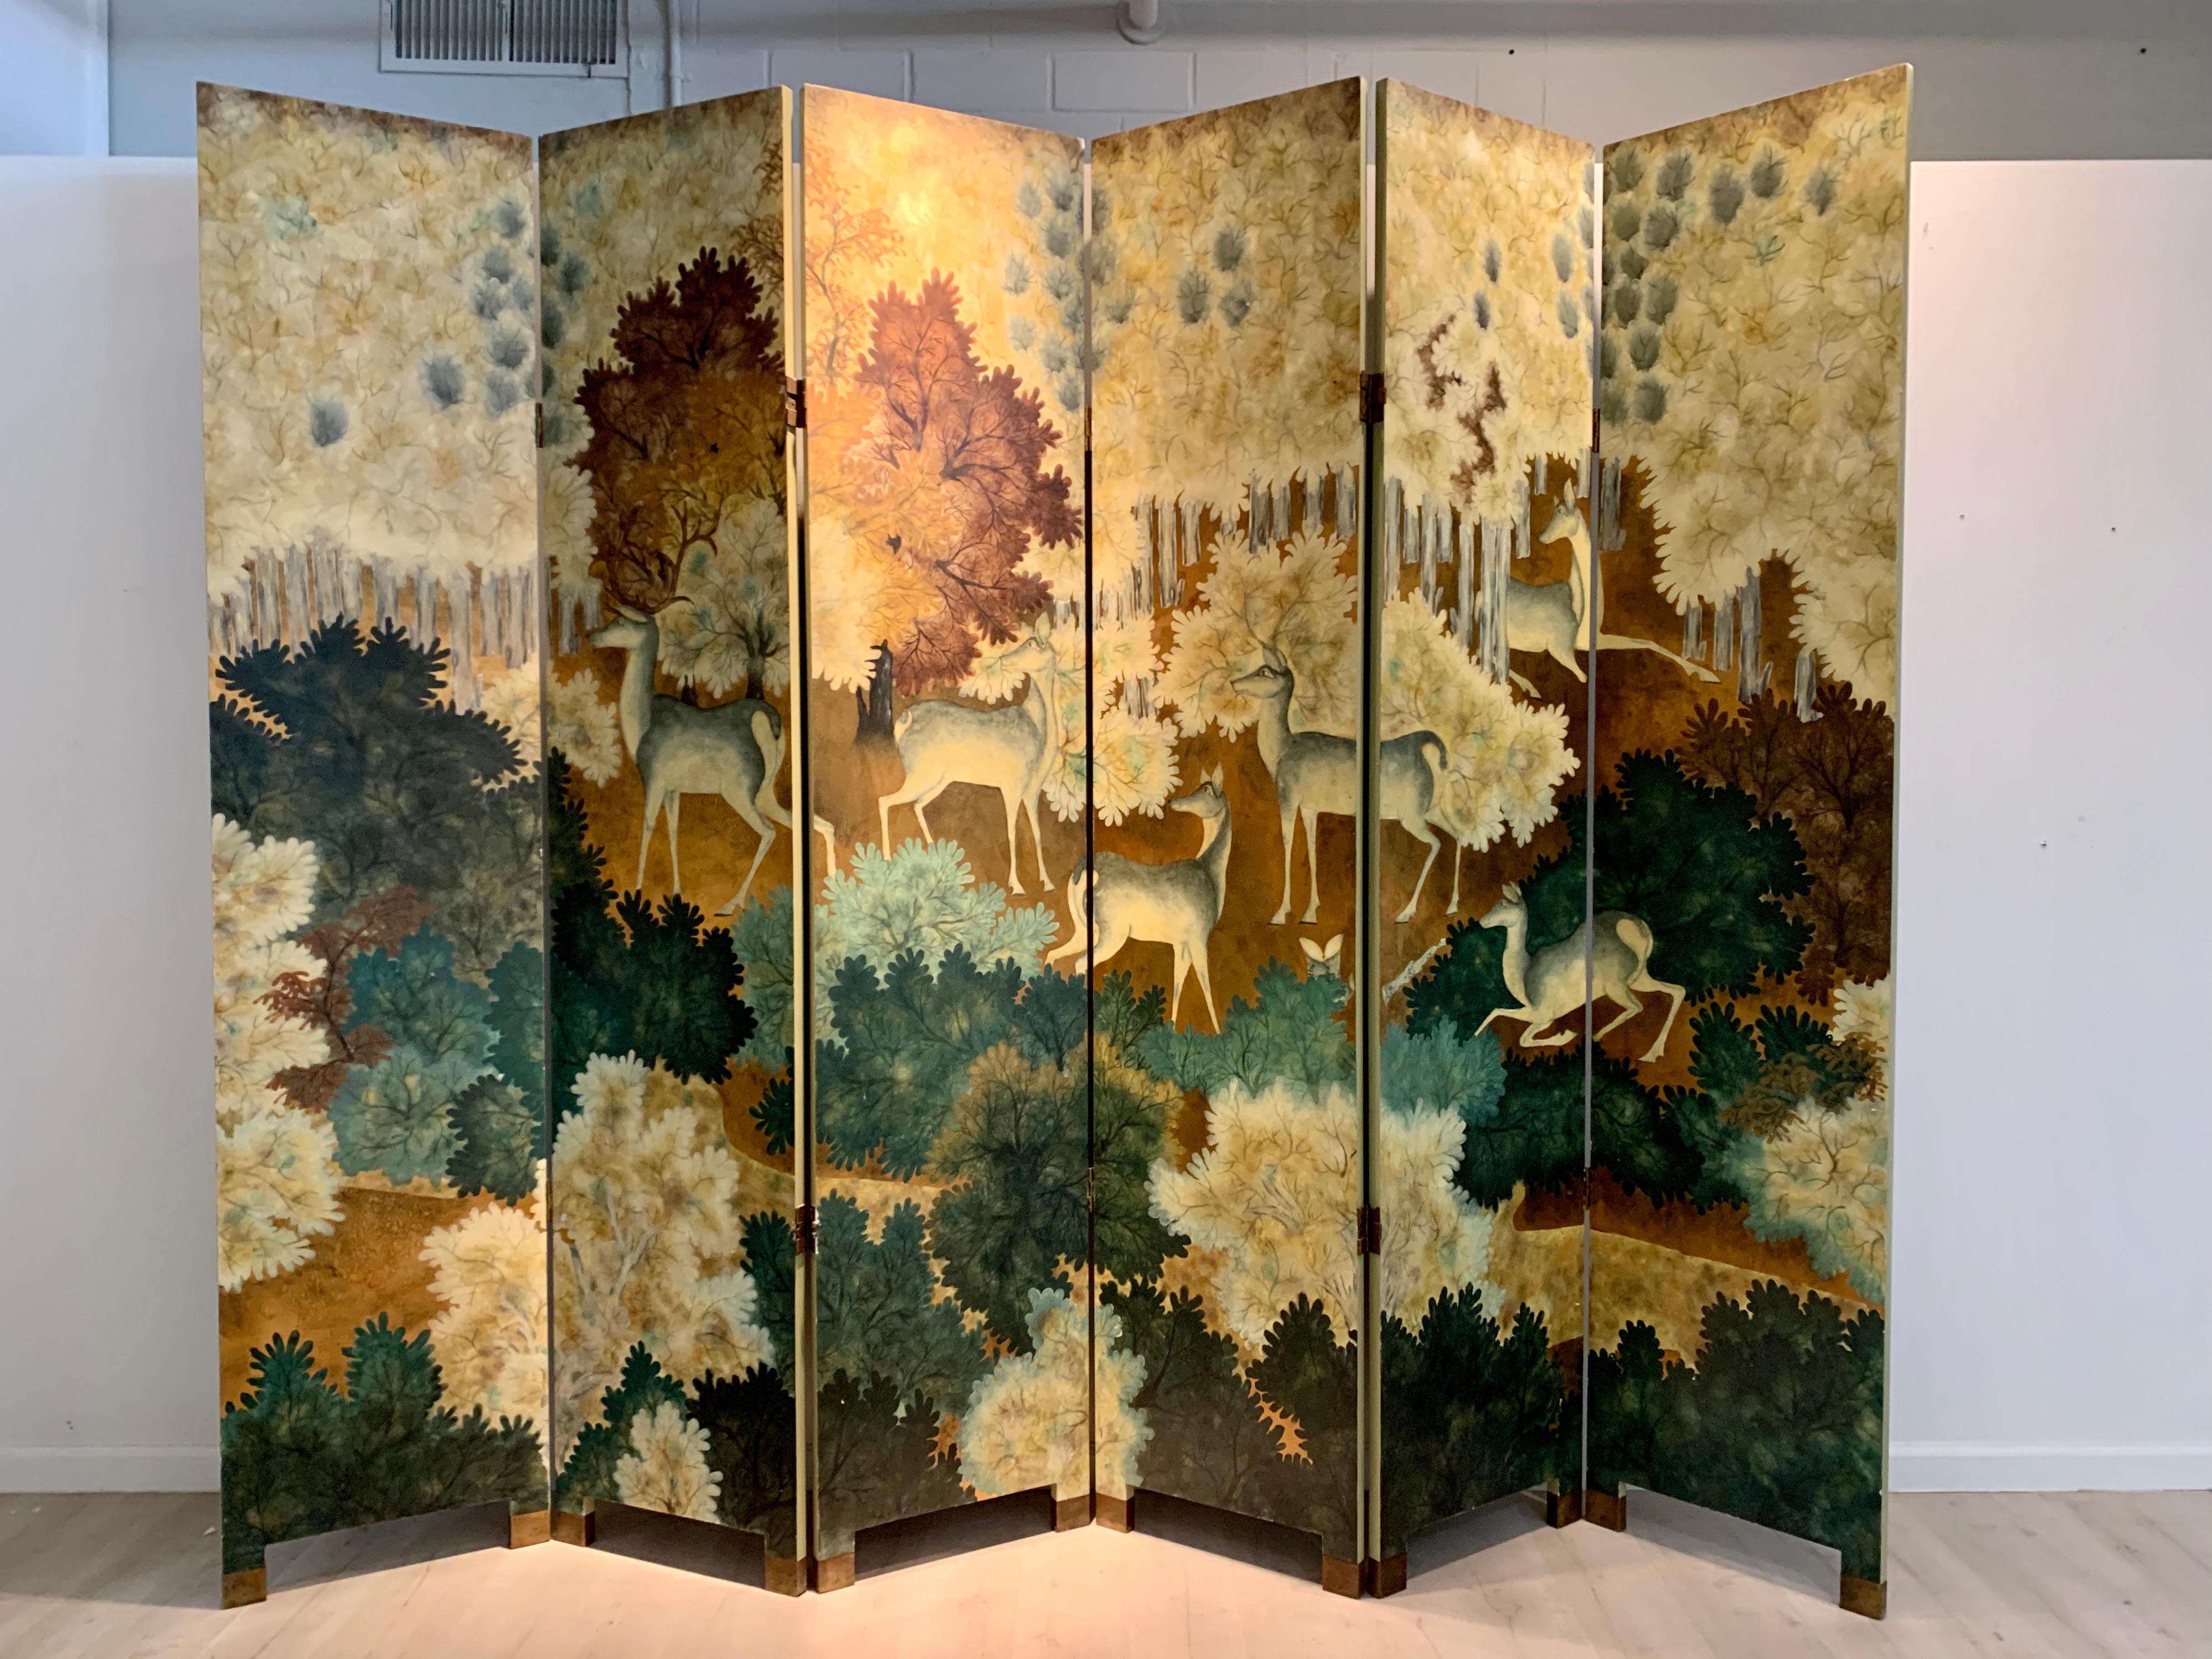 A spectacular large Art Deco style lacquer painted wooden screen with images of deer in a forrest, in the styles of Jean Dunand and Pham Hau, late 20th century, circa 1980's. 

The magnificent tall, six paneled folding screen of hand painted lacquer